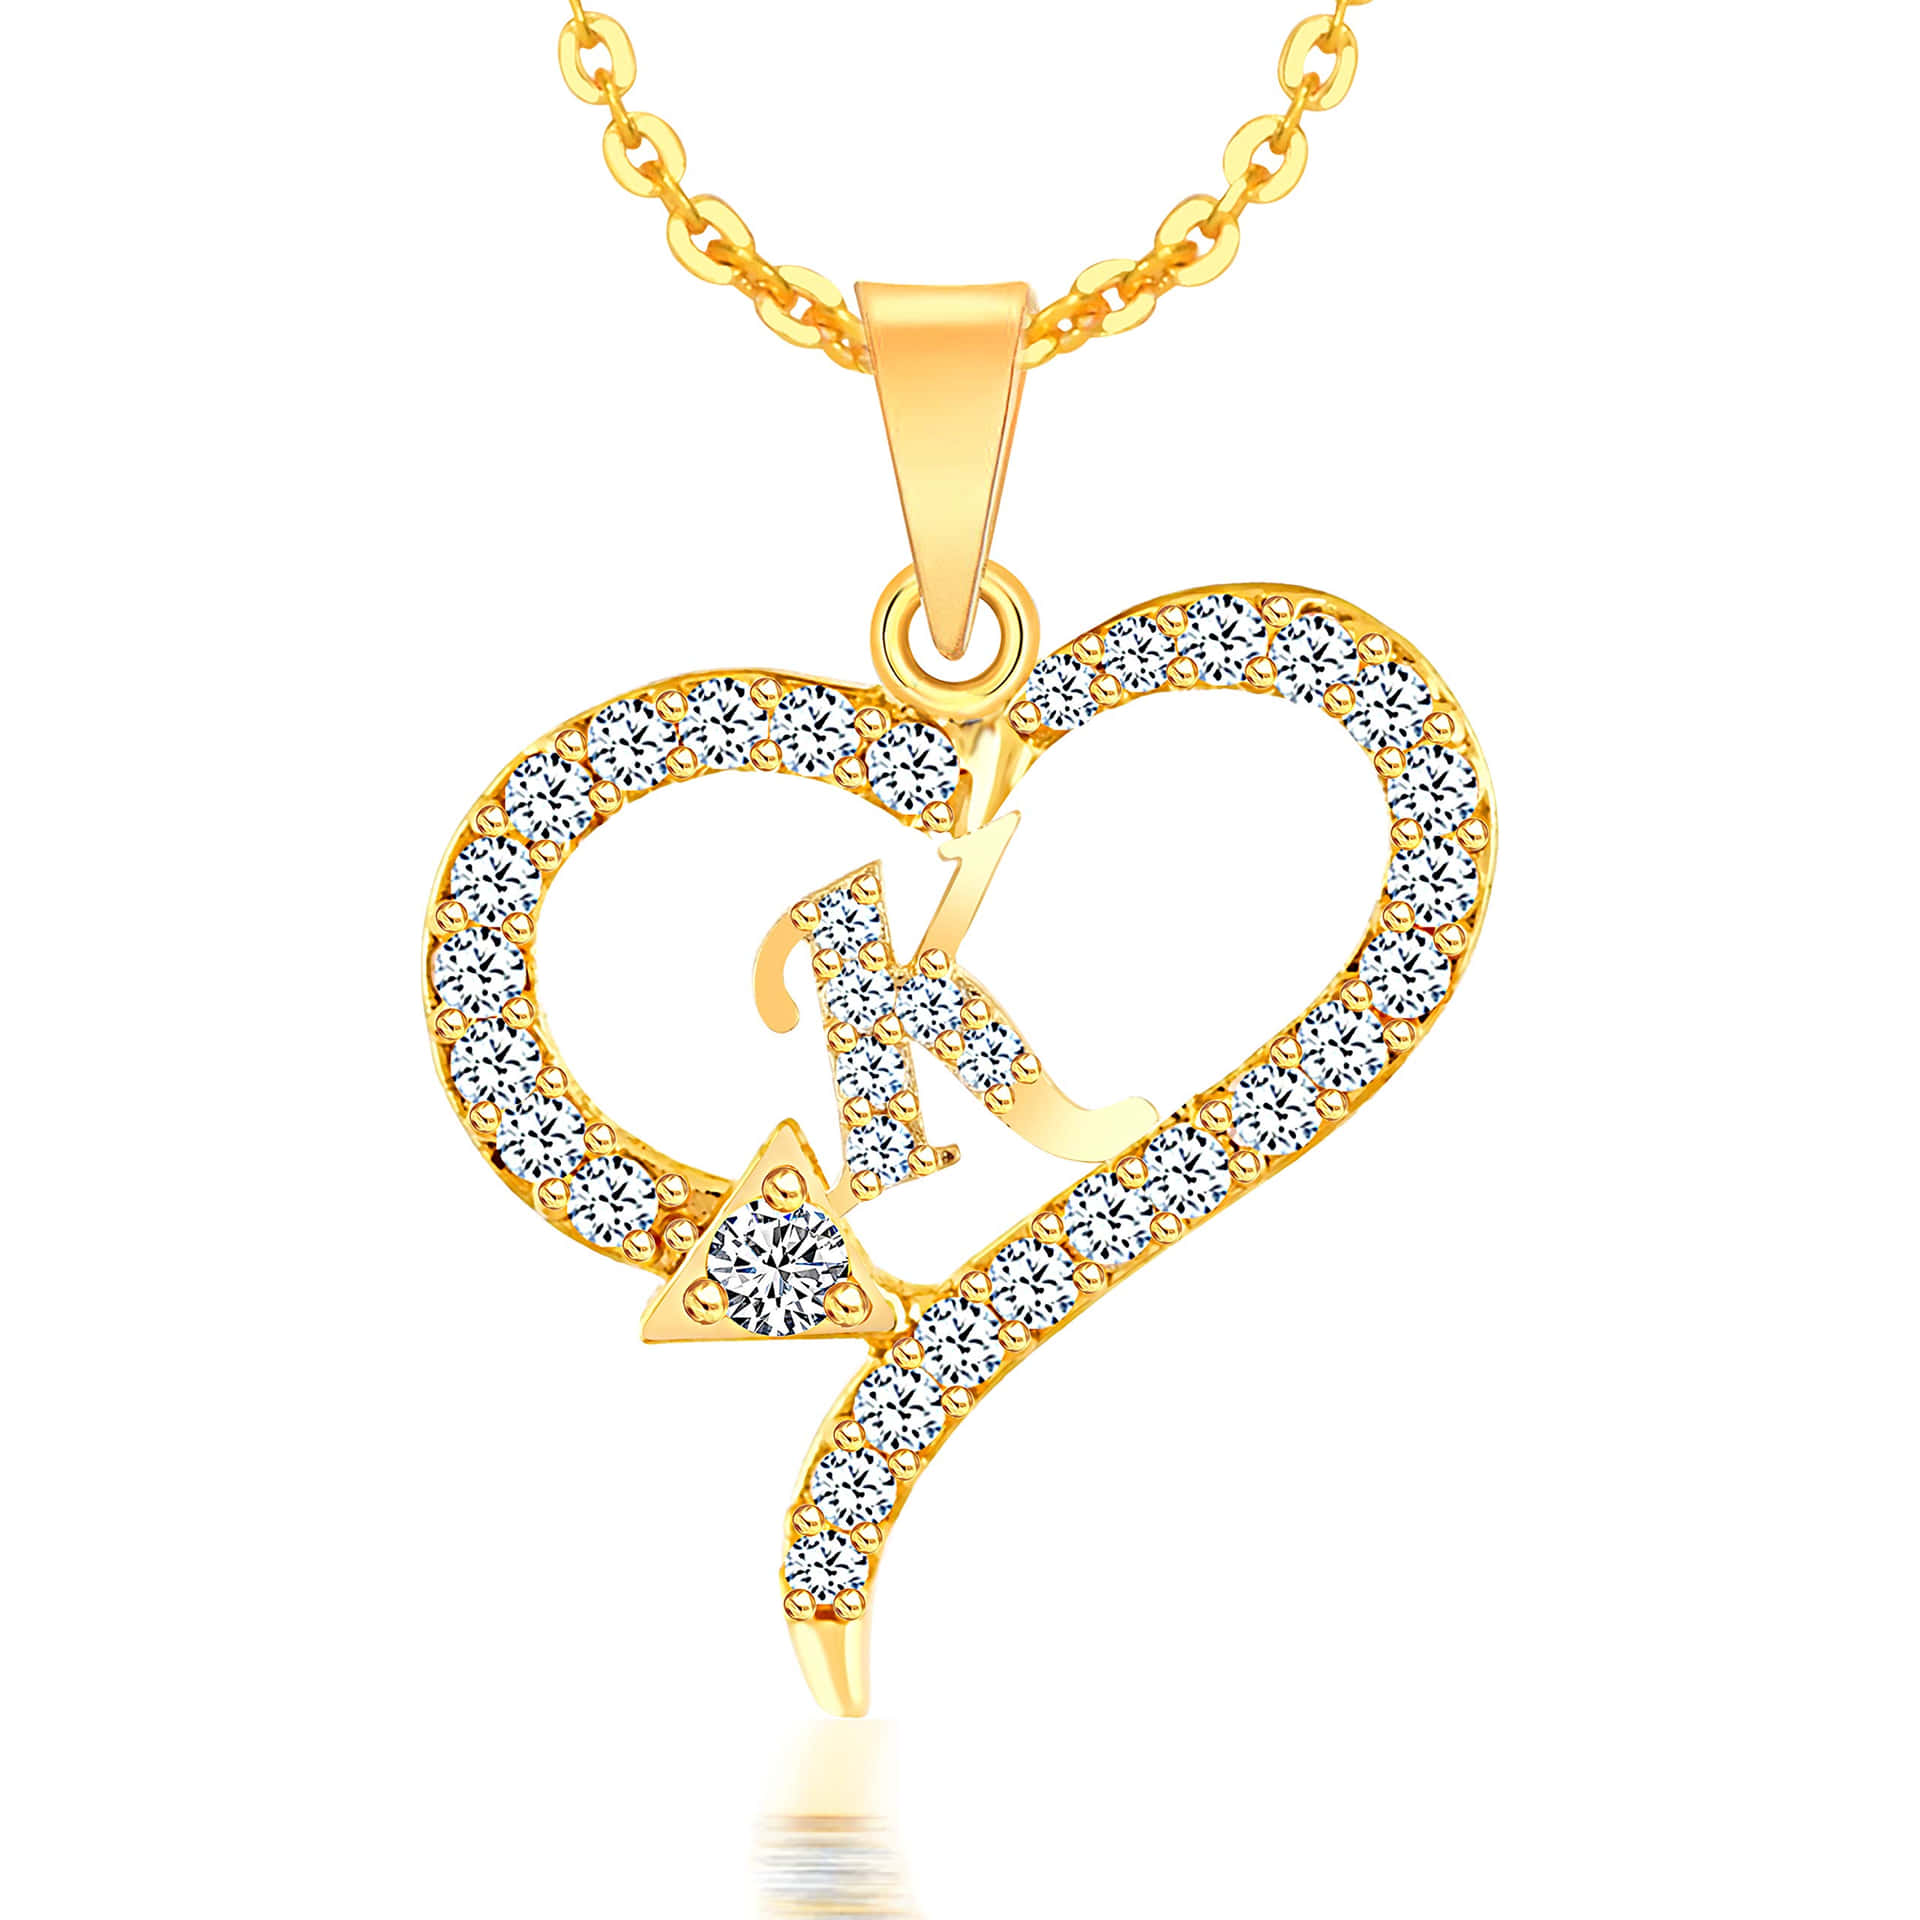 A Gold Plated Heart Shaped Pendant With Diamonds